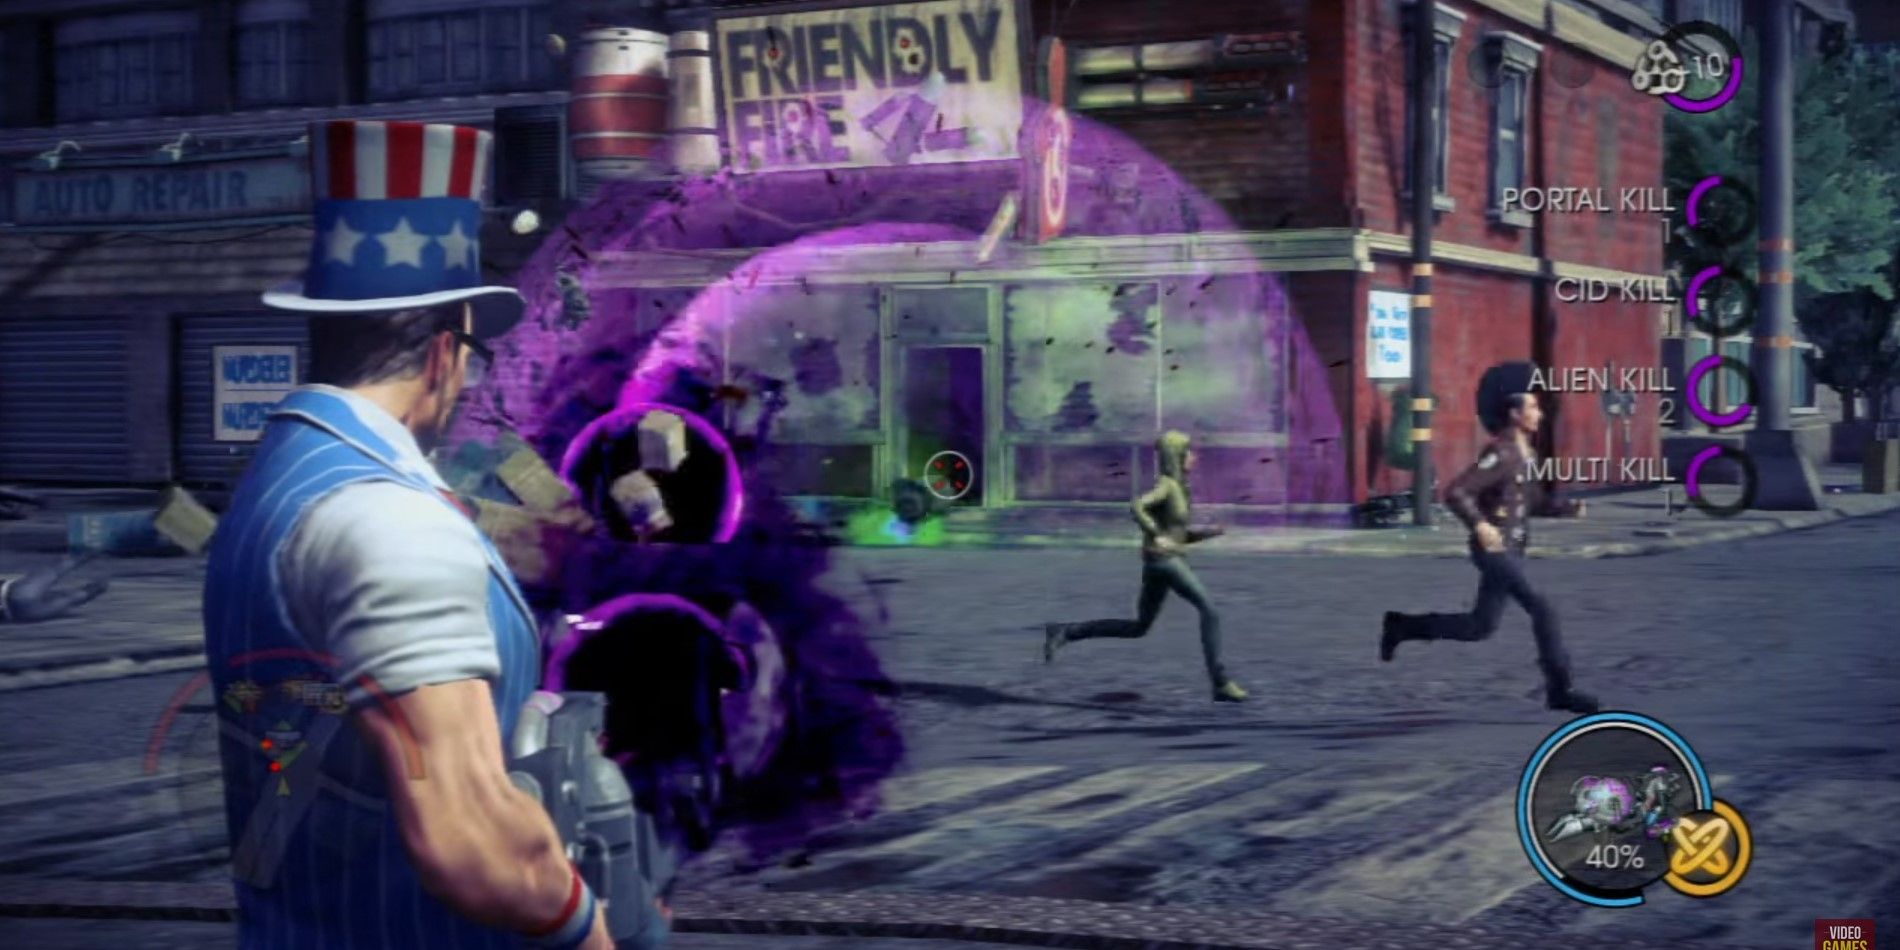 Saints Row IV: Re-Elected Review - It's Just as Good